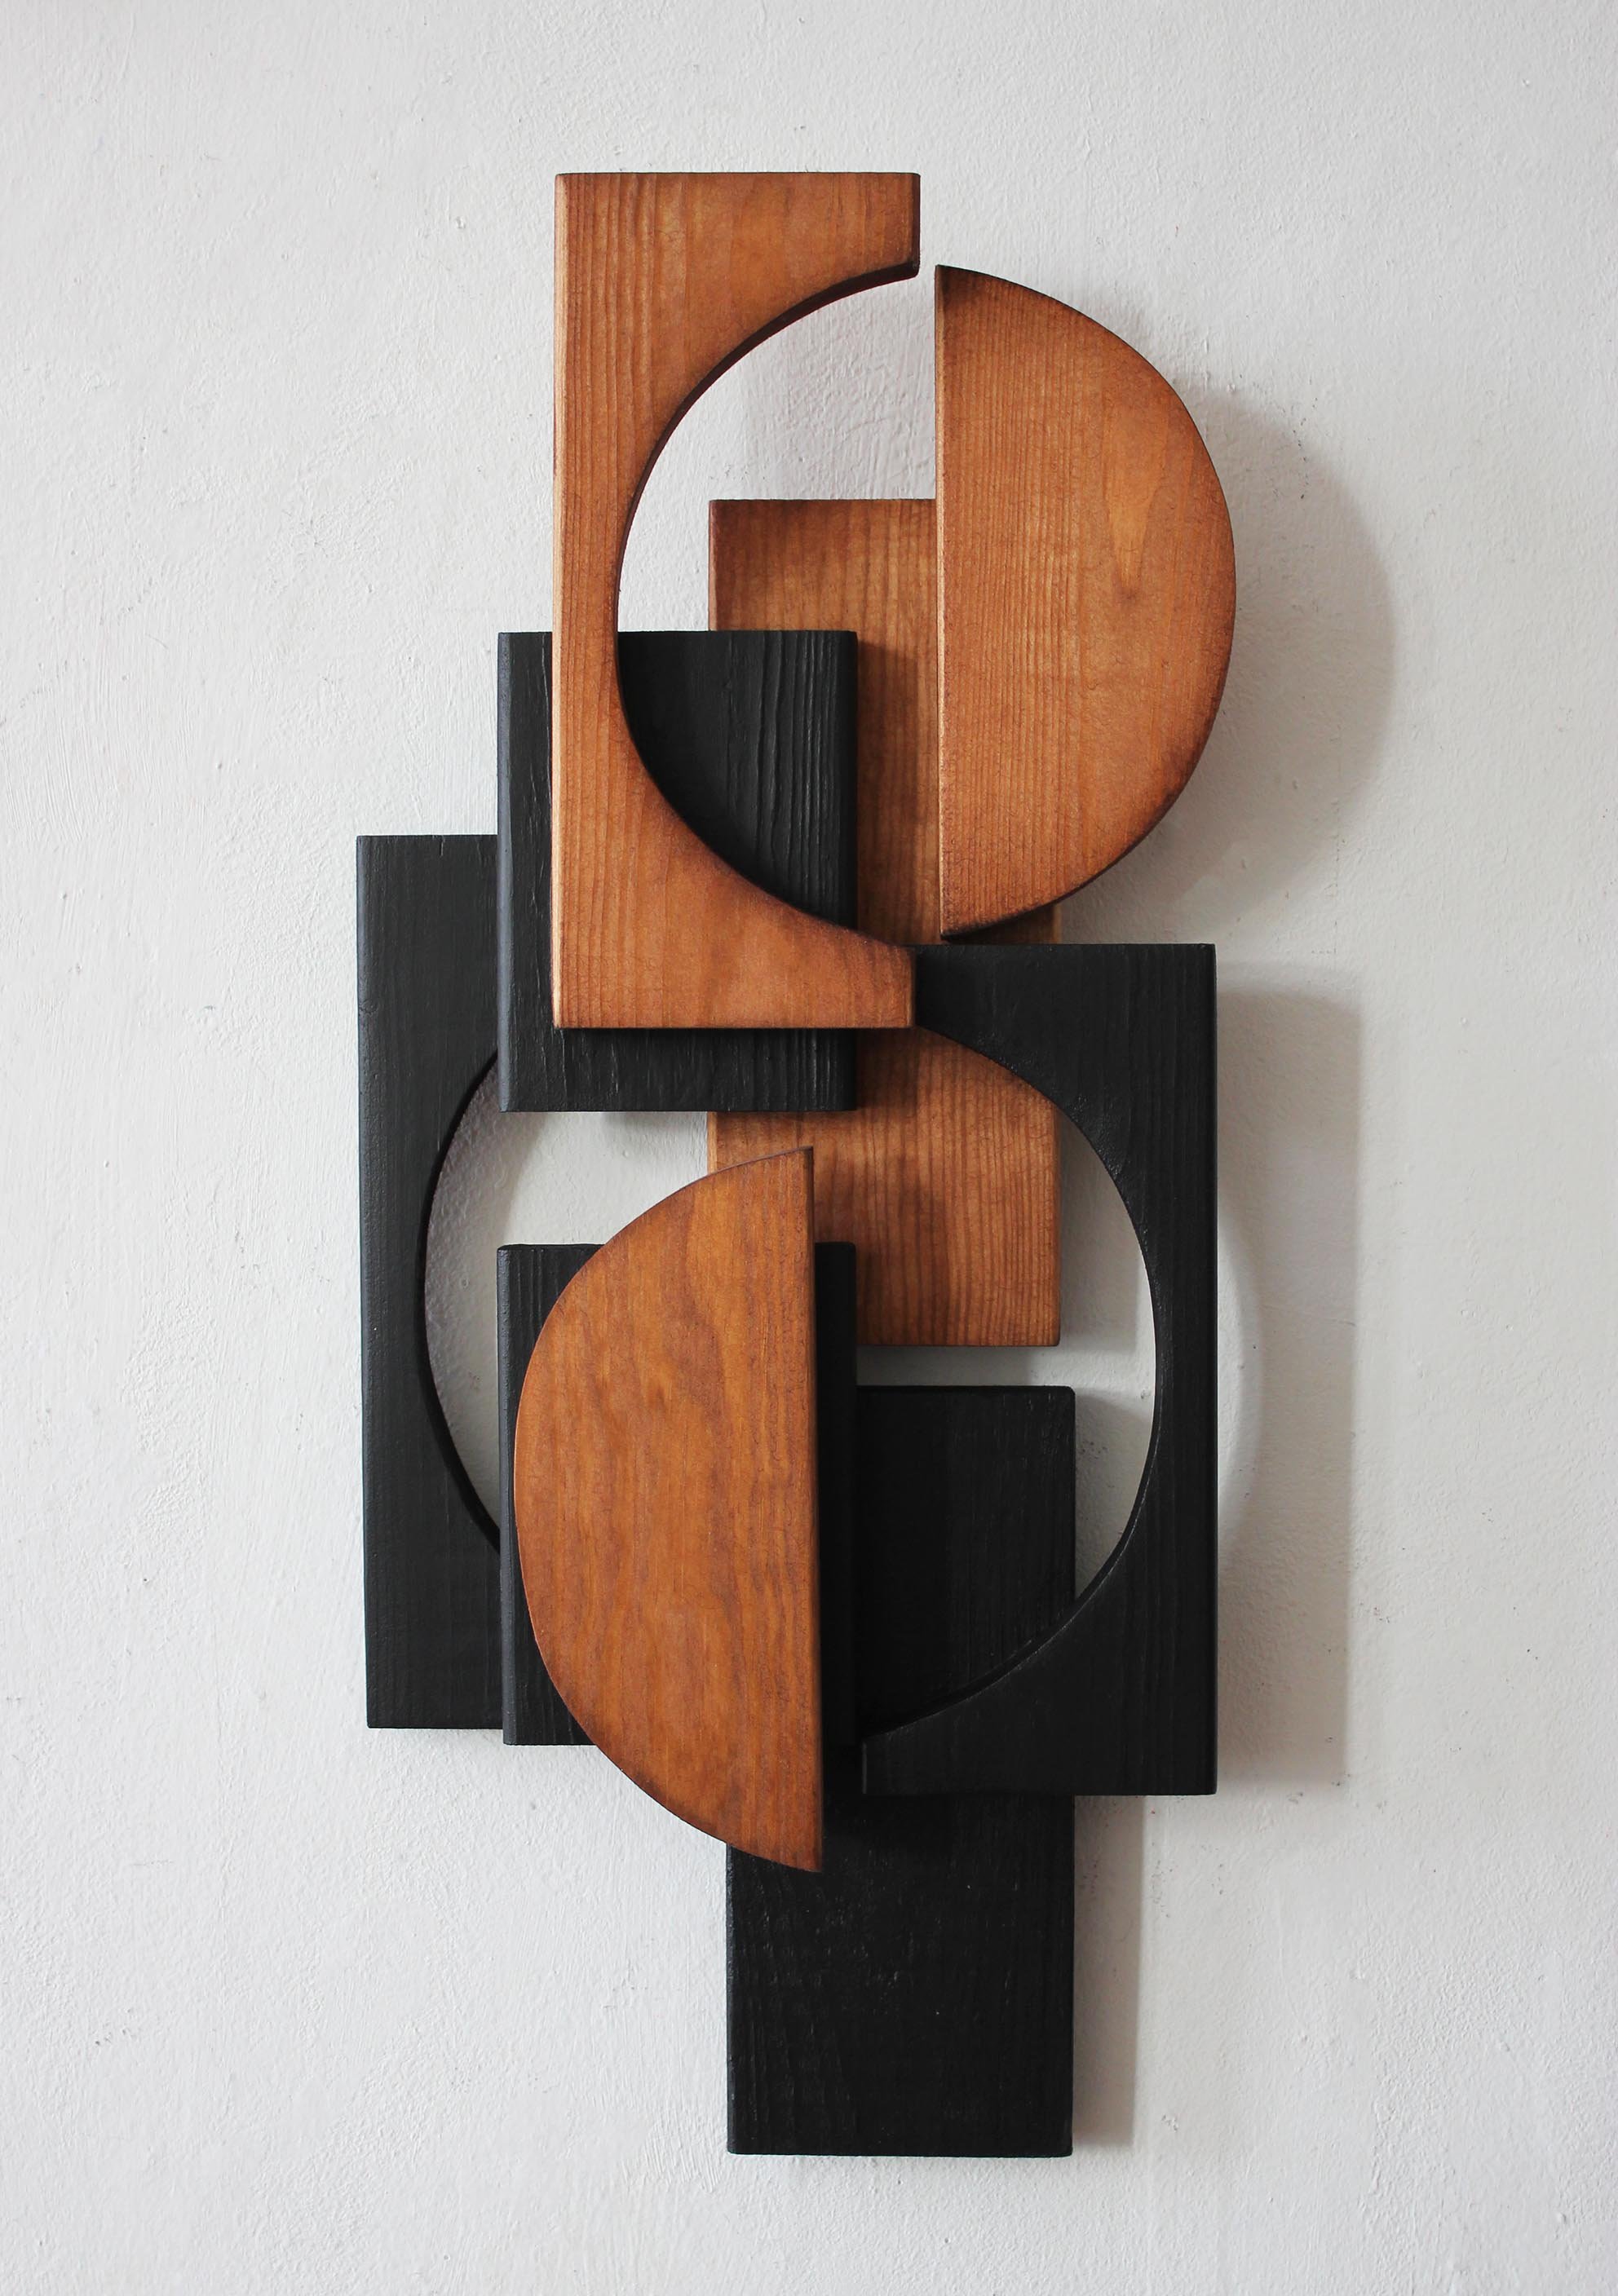  Stained and waxed / painted wood wall sculpture 2021 